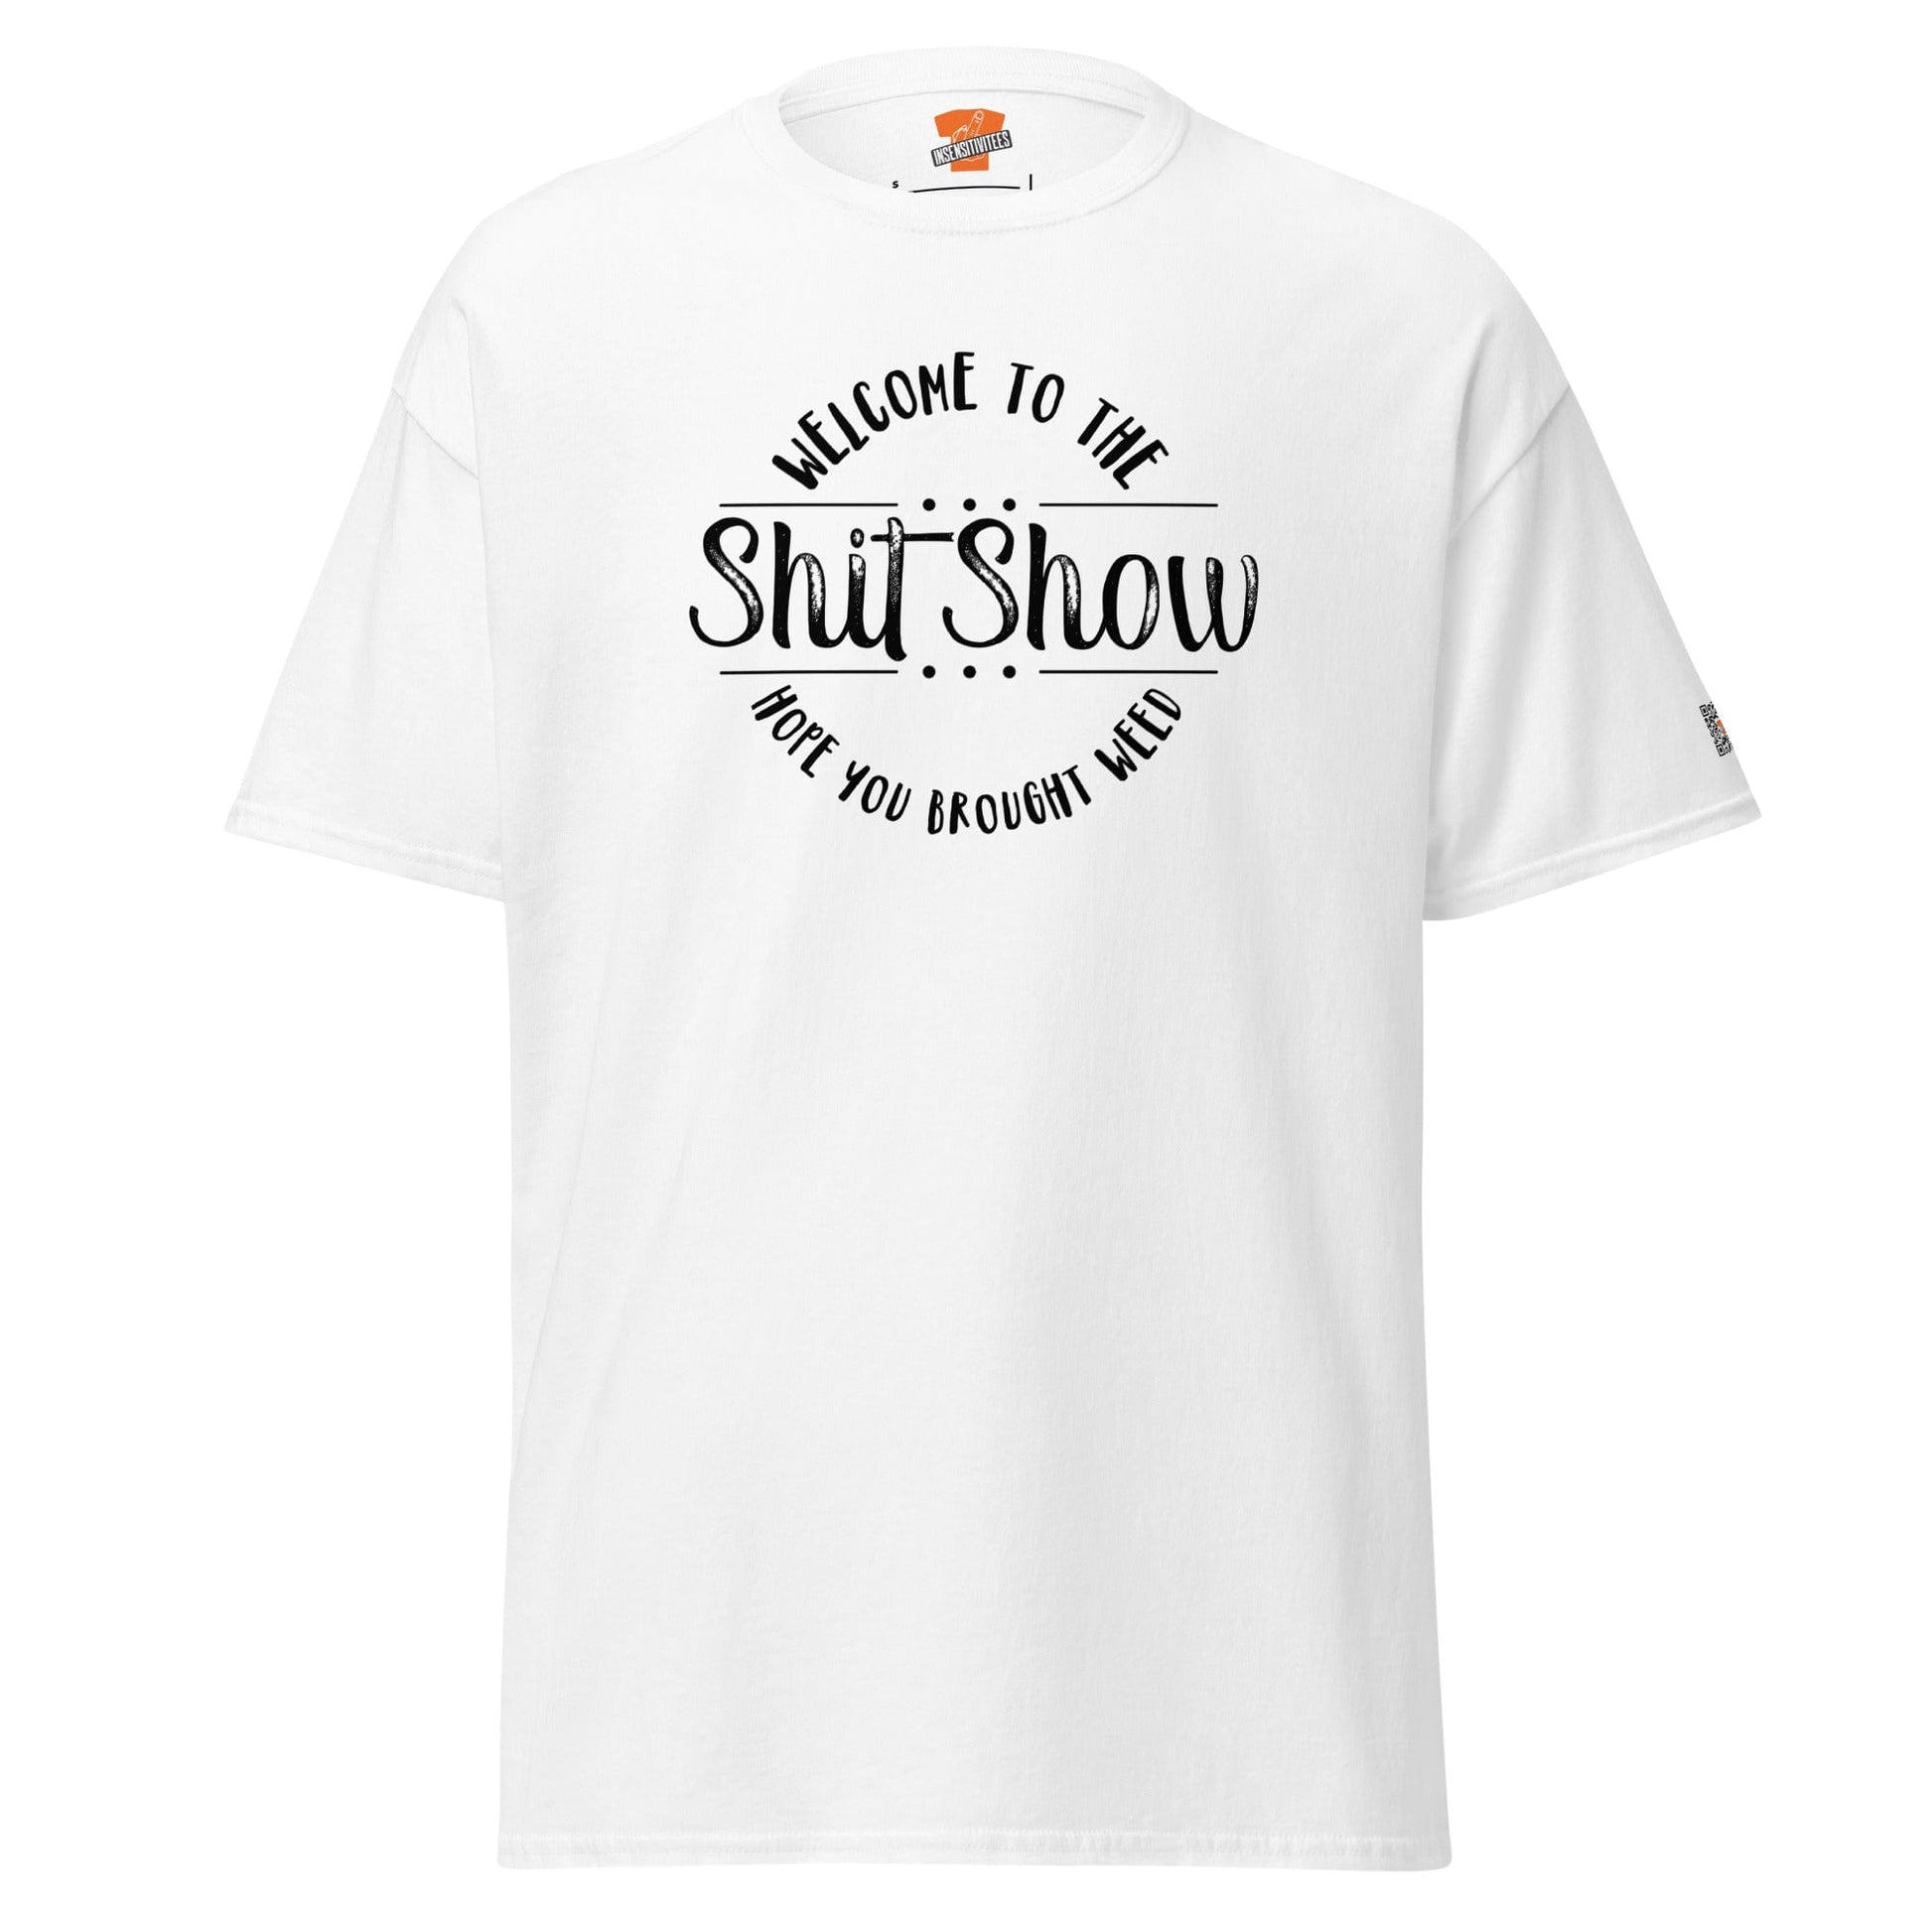 InsensitiviTees™️ White / S Welcome to the Shitshow Hope You Brought Weed Classic Unisex Tee